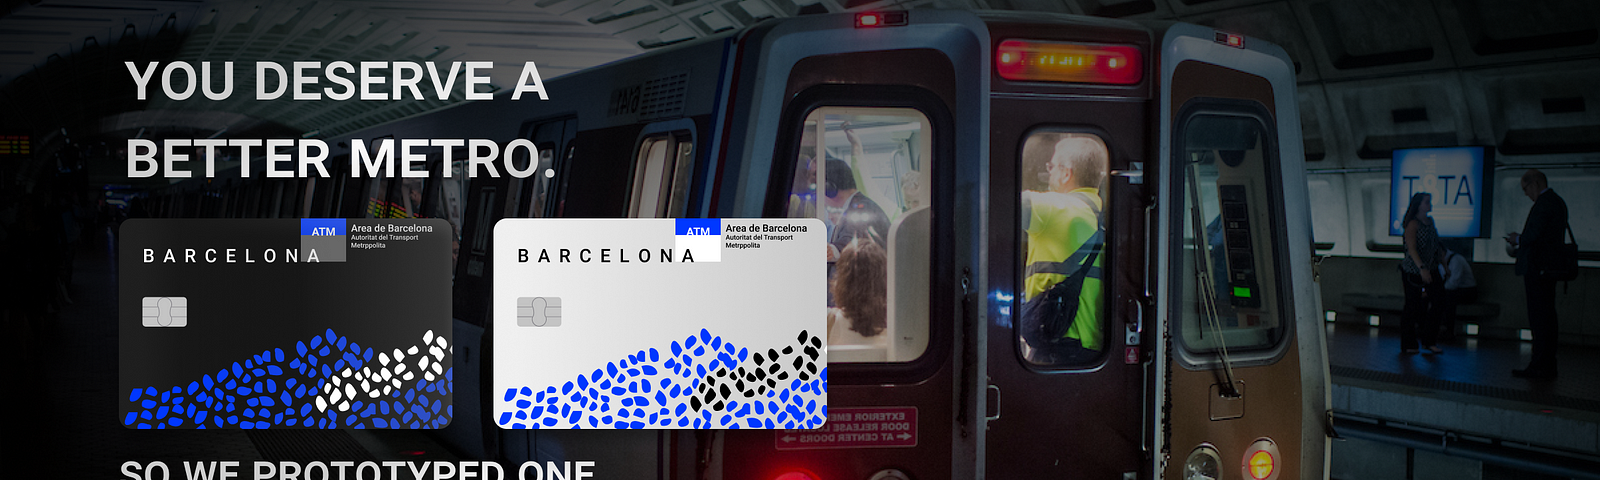 Barcelona metrocard advertisement. “You deserve a better metro. So we prototyped one. It’s the metro redesigned”